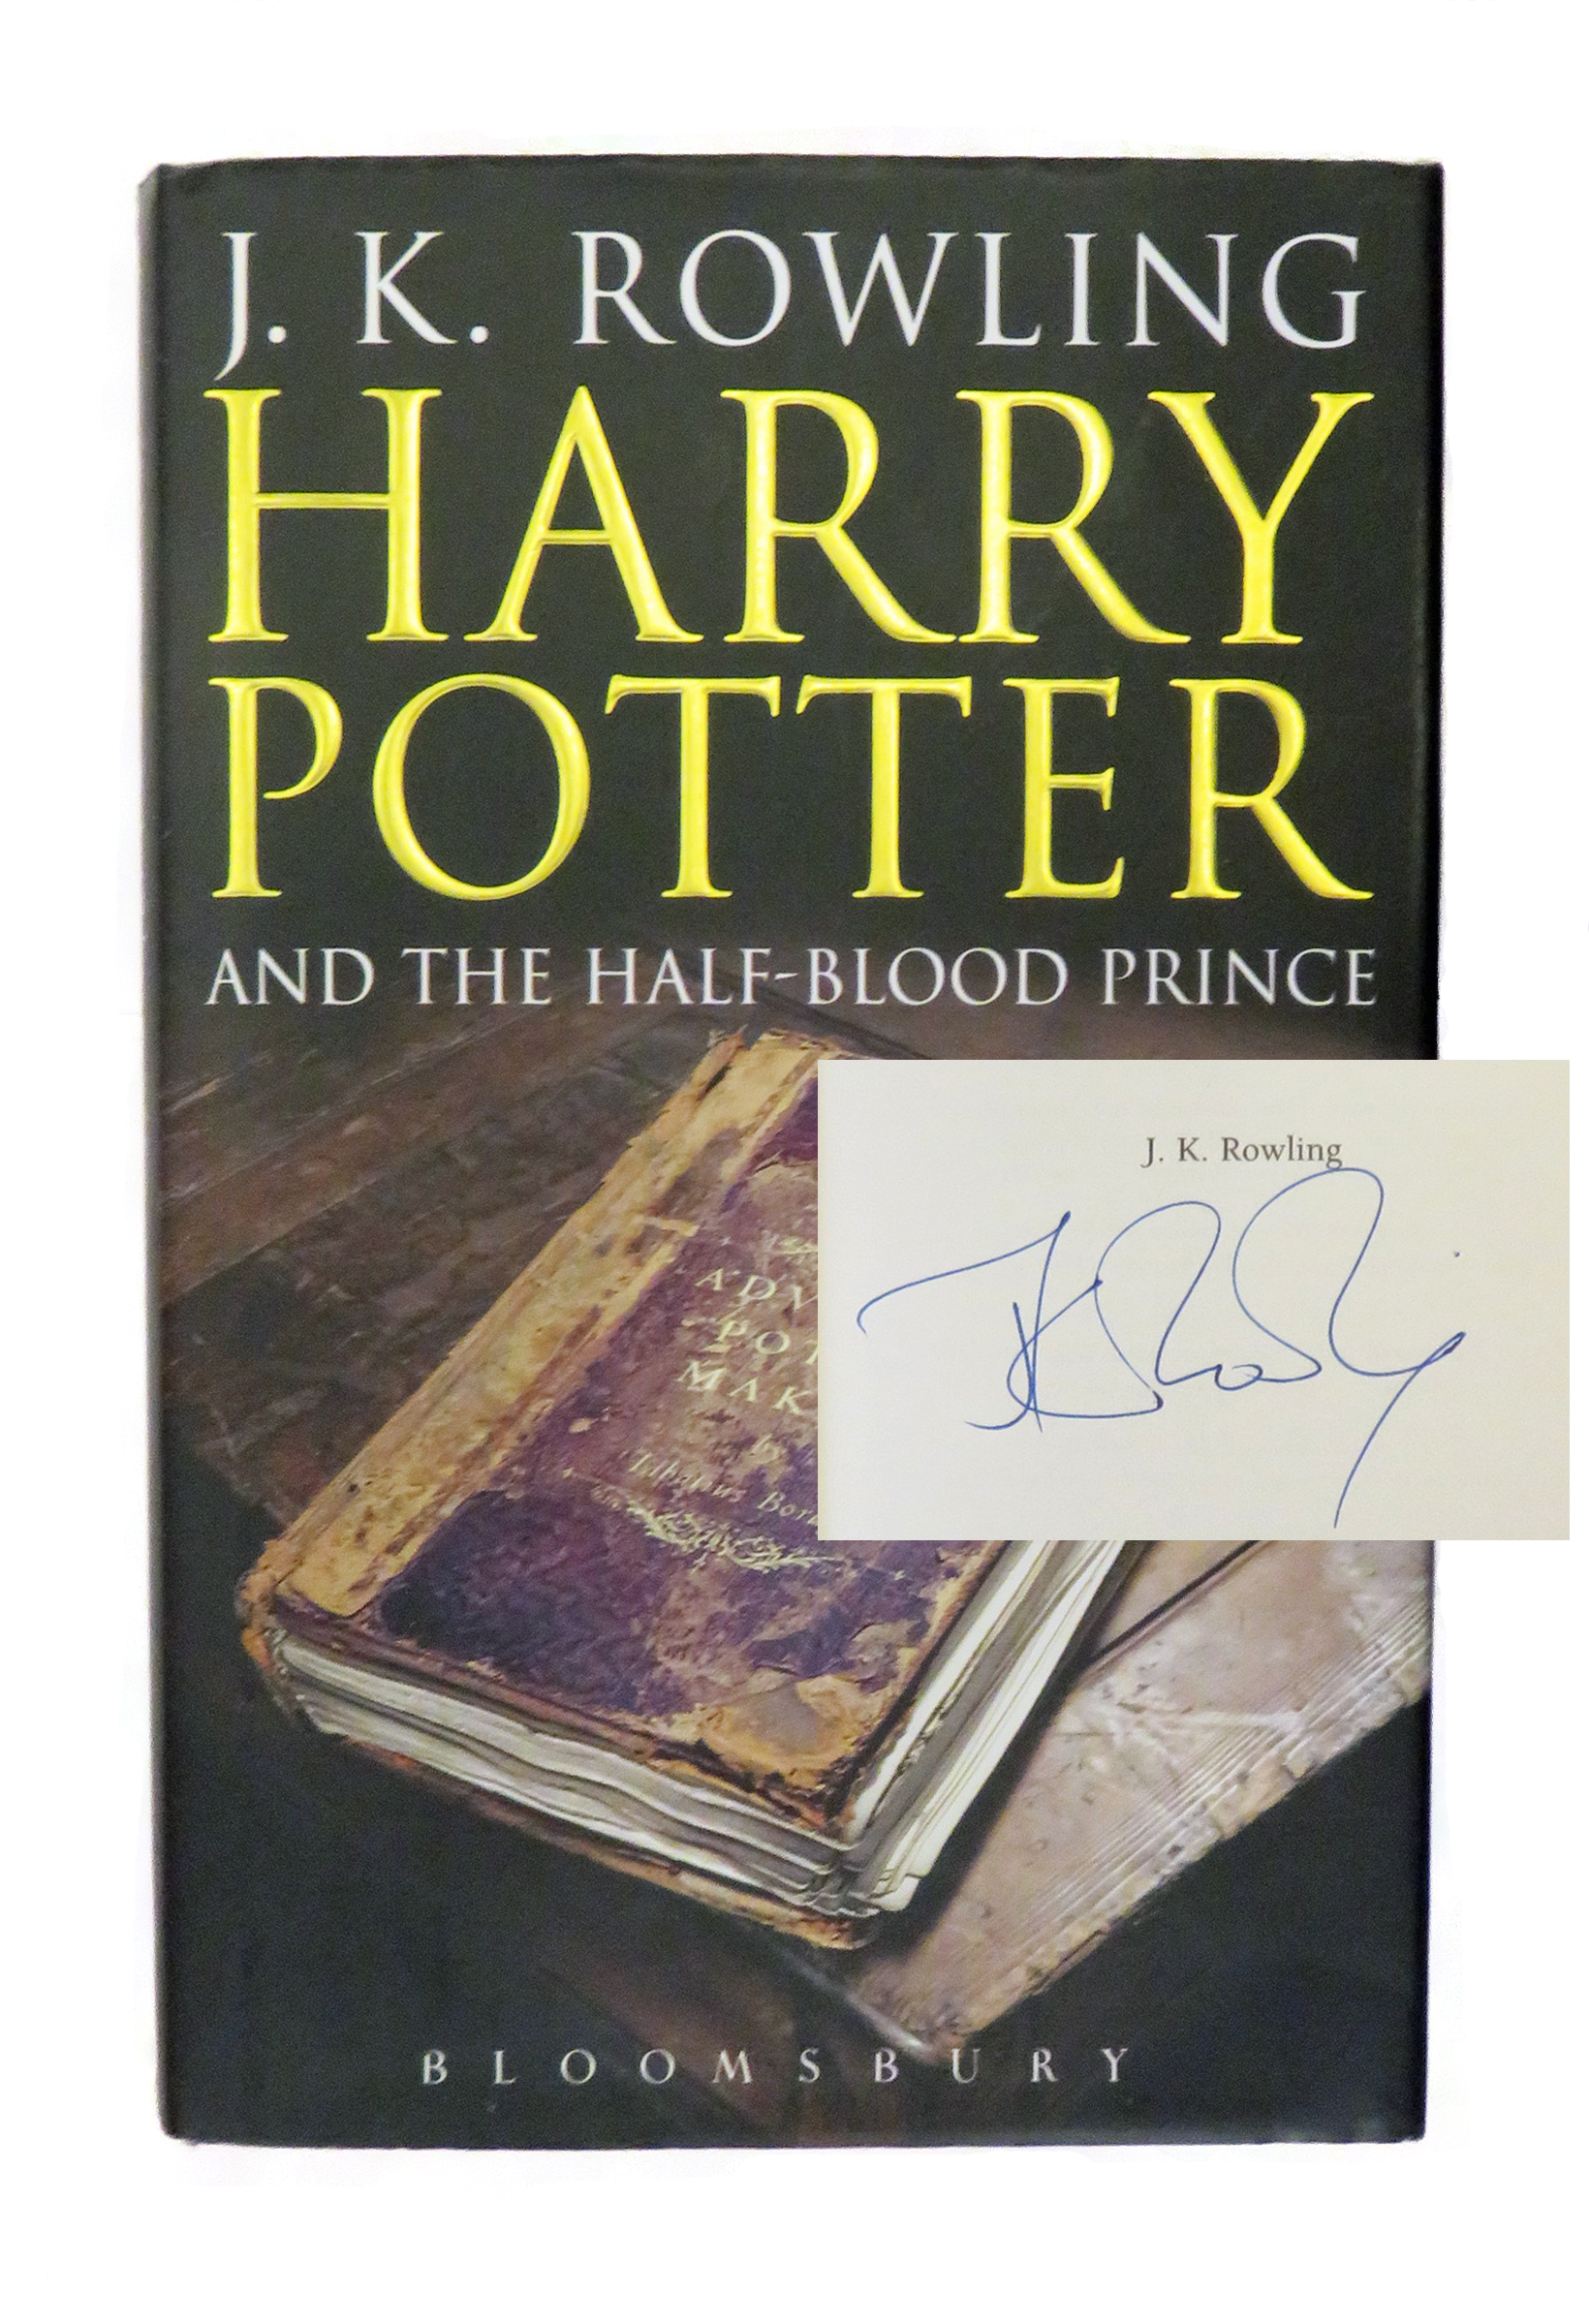 Harry Potter and the Half-Blood Prince SIGNED by JK Rowling, Jim Broadbent, Julia Walters and more